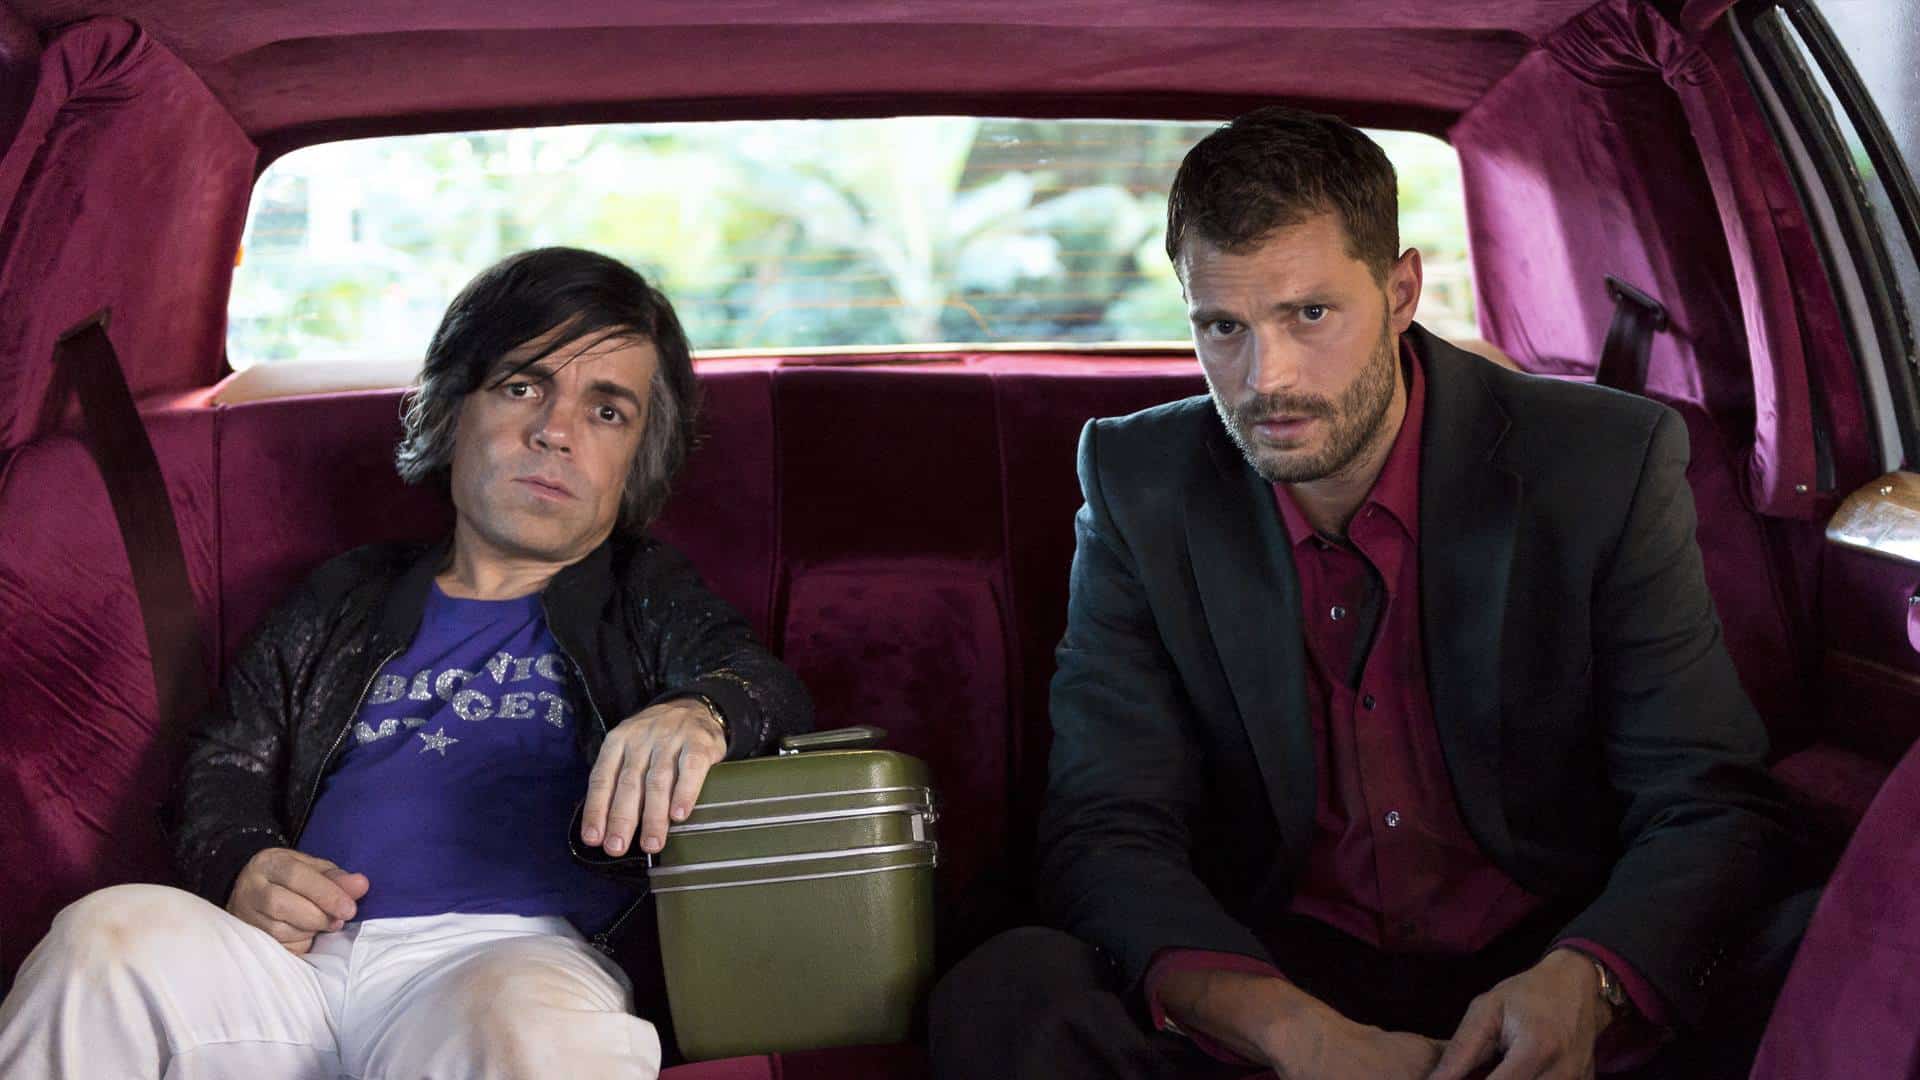 My Dinner with Hervé: recensione del film con Peter Dinklage